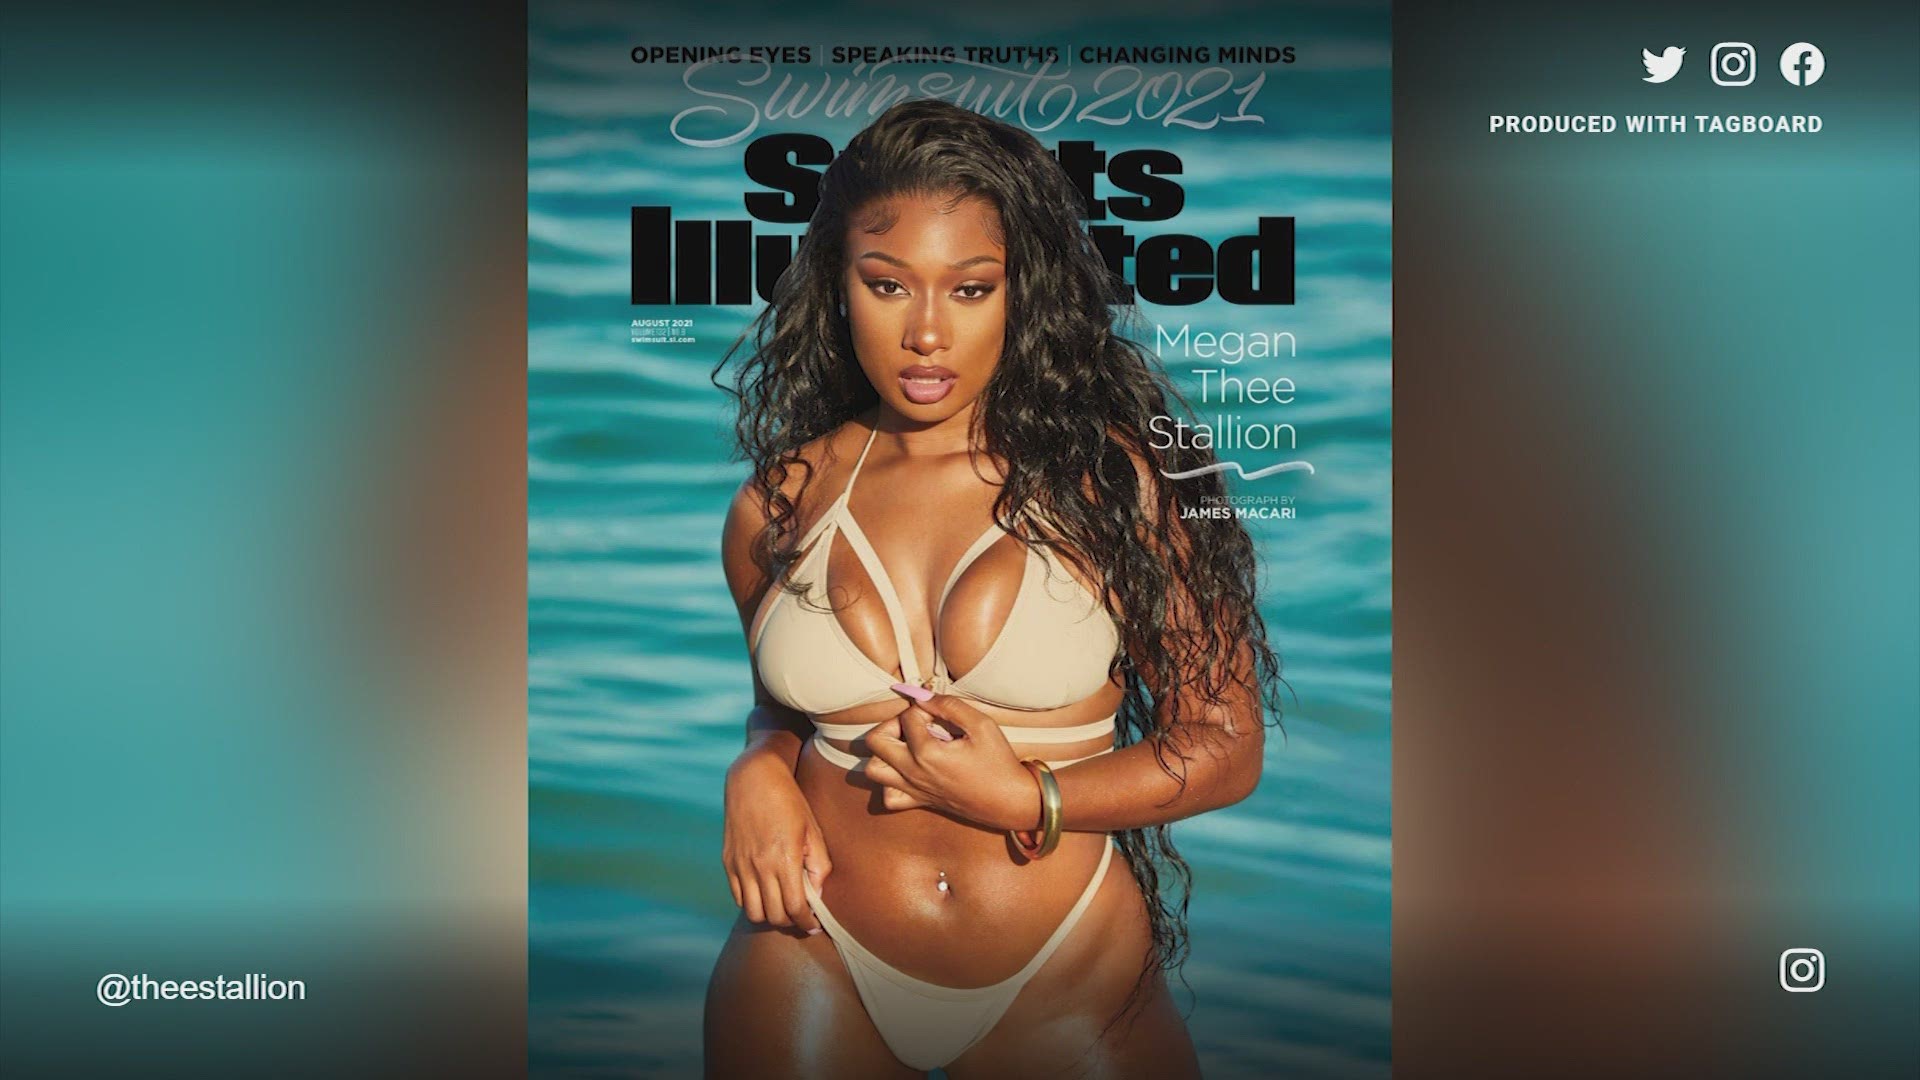 Houston's Megan Thee Stallion graced the cover of the Sports Illustrated 2021 Swimsuit Issue. She is the first female rapper to ever take the cover.